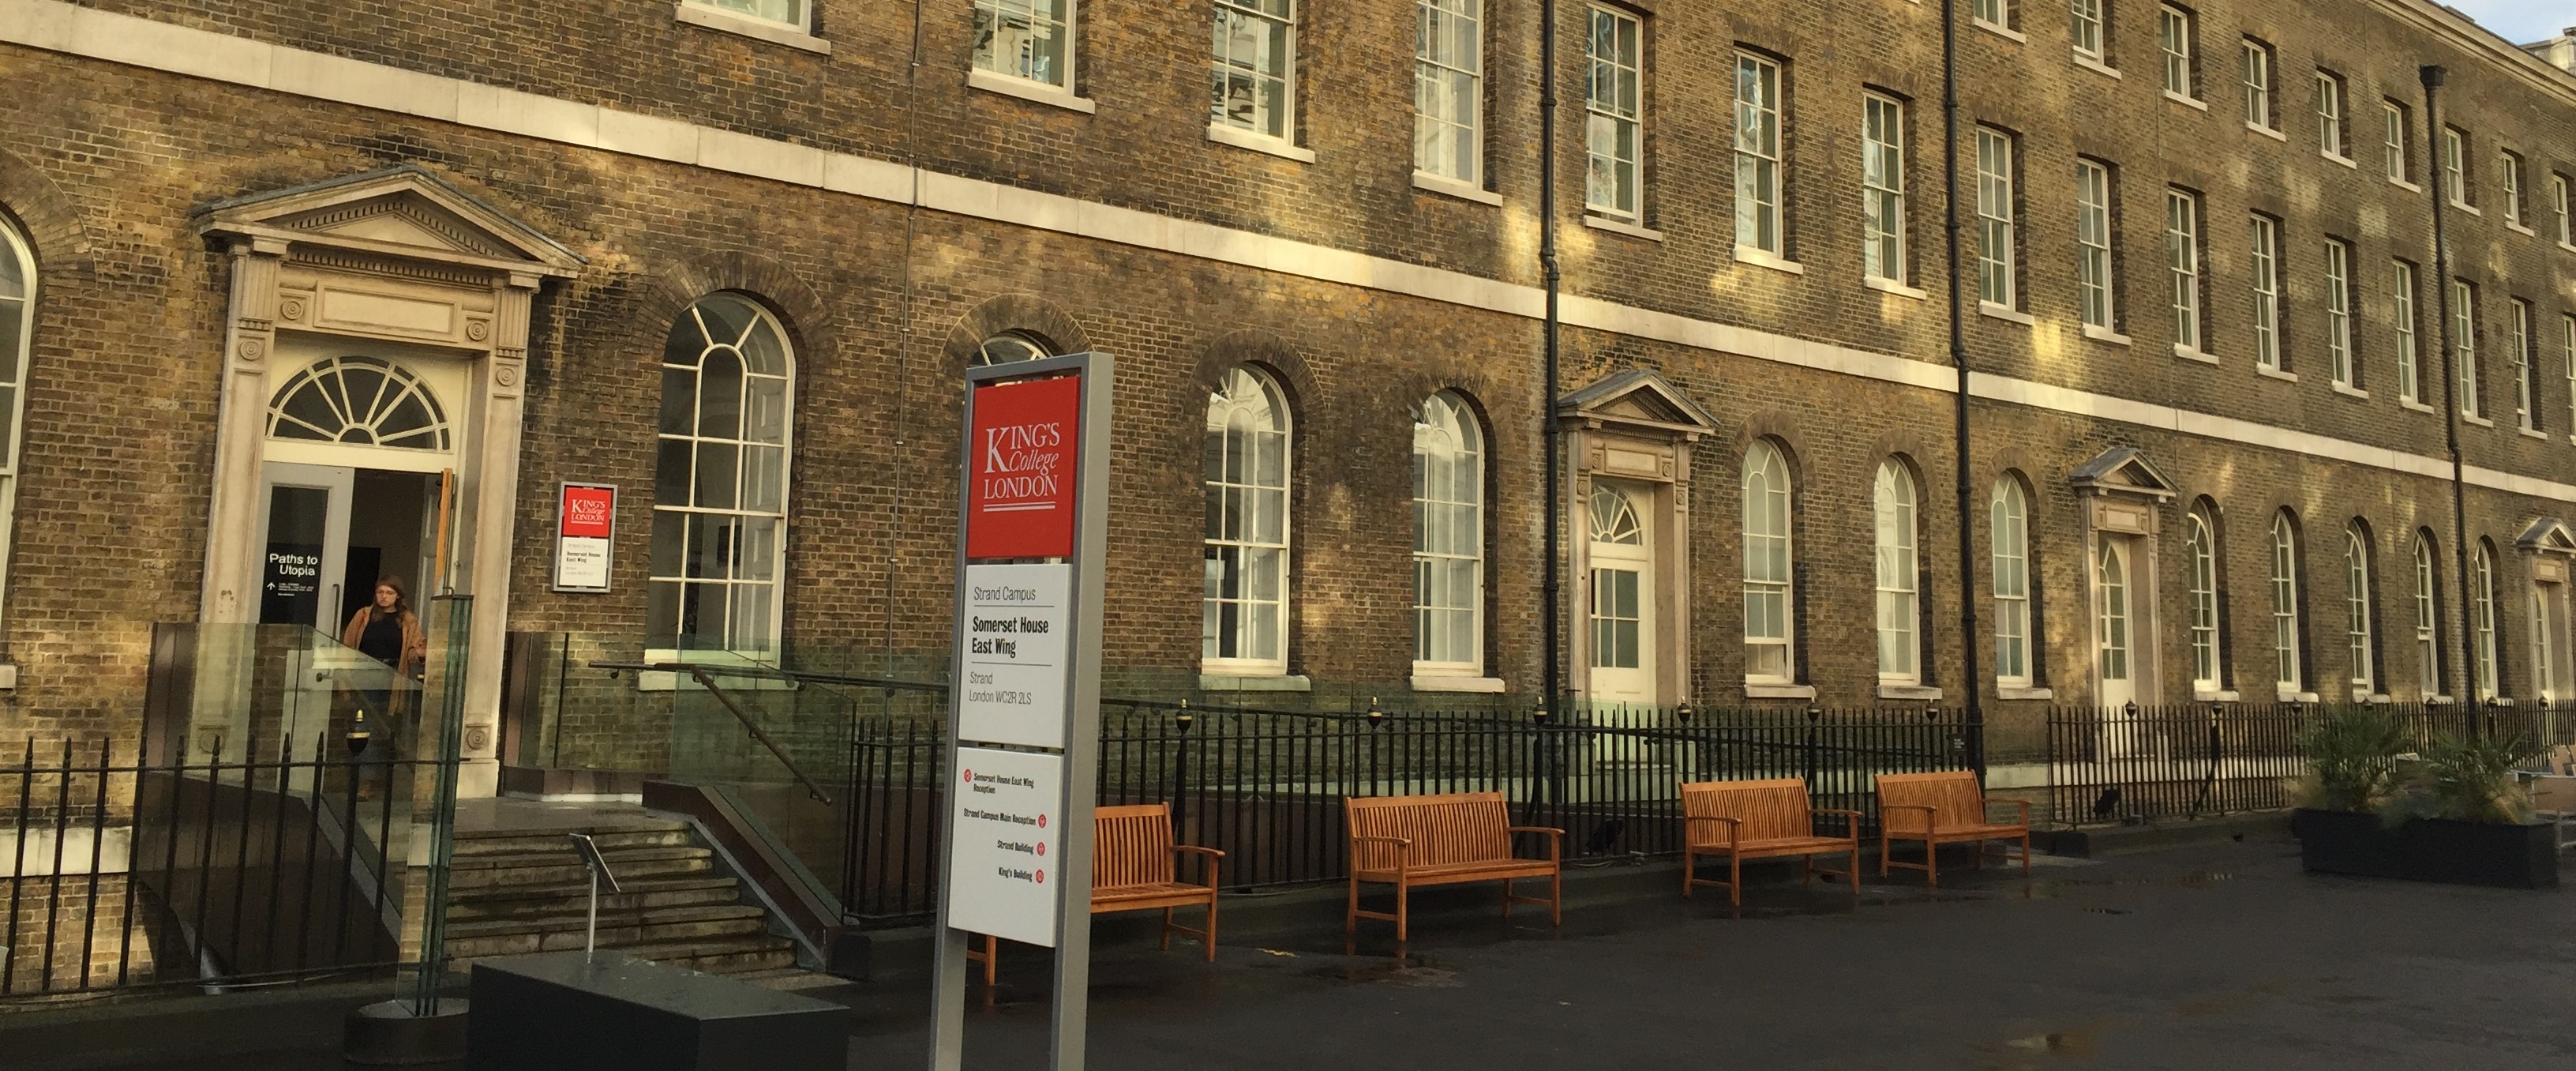 King’s College London tells students their emails may be monitored